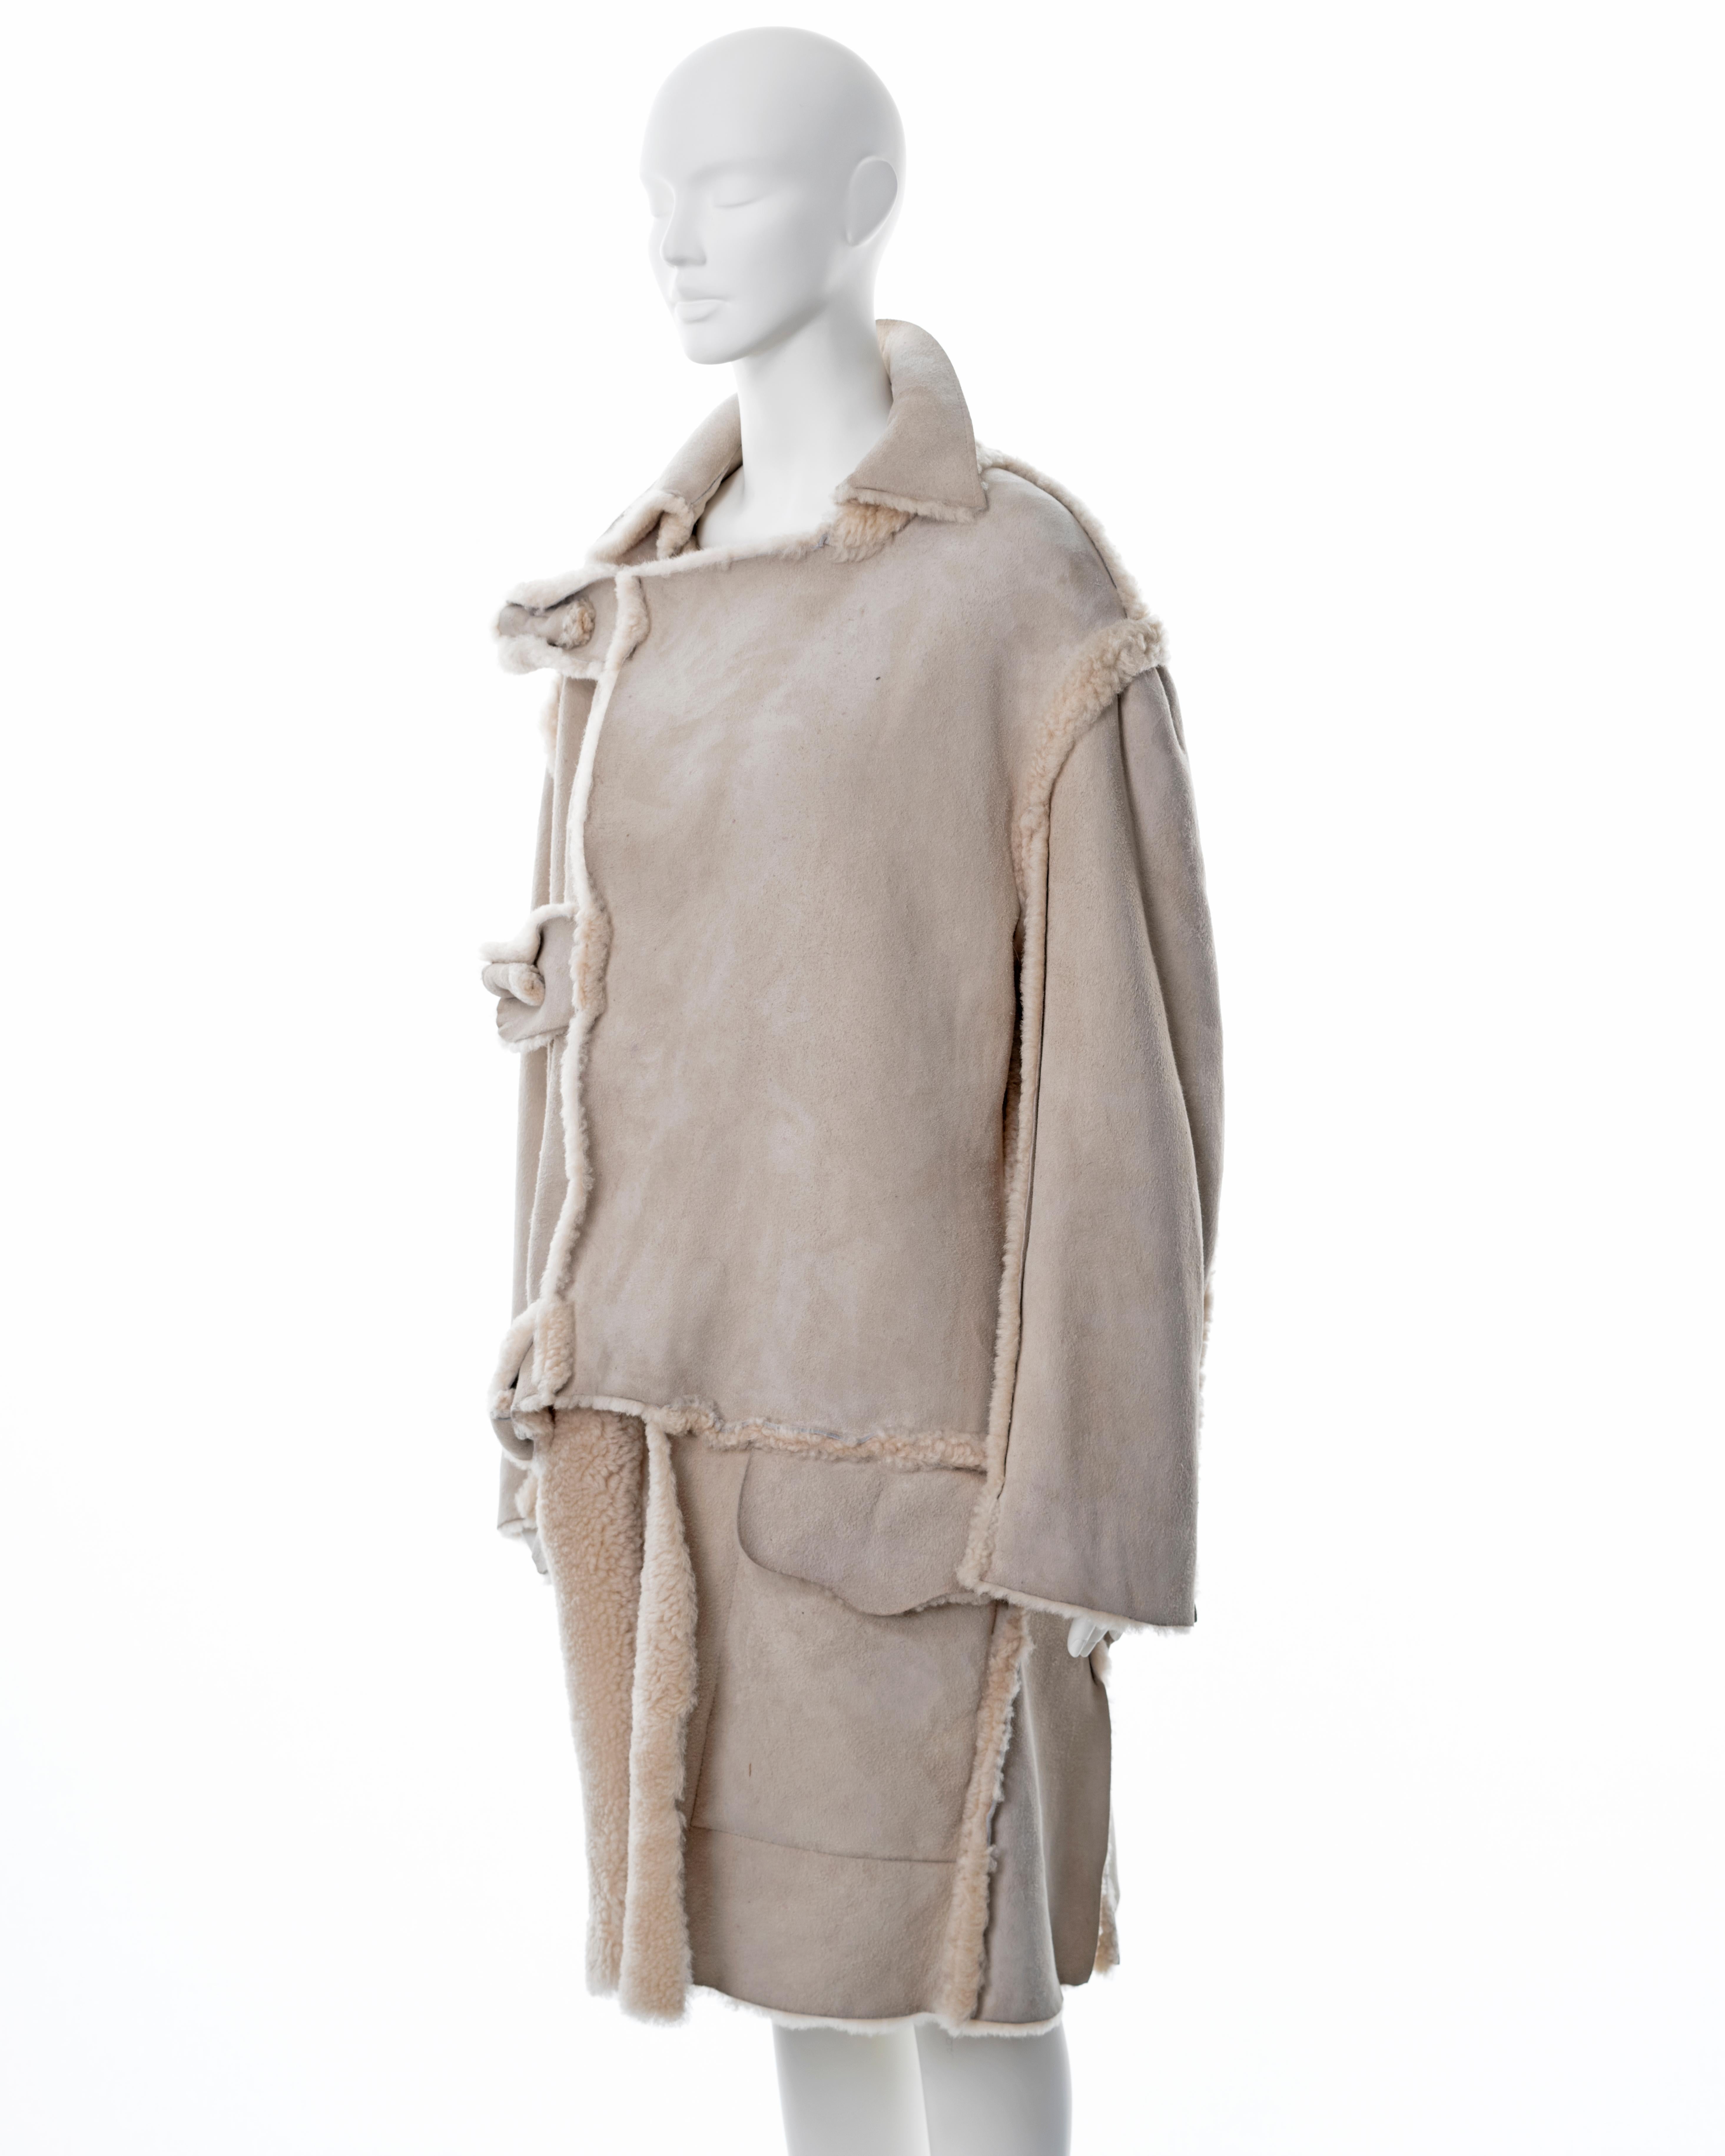 Worlds End by Vivienne Westwood and Malcolm McLaren 'Buffalo' coat, fw 1982 For Sale 8